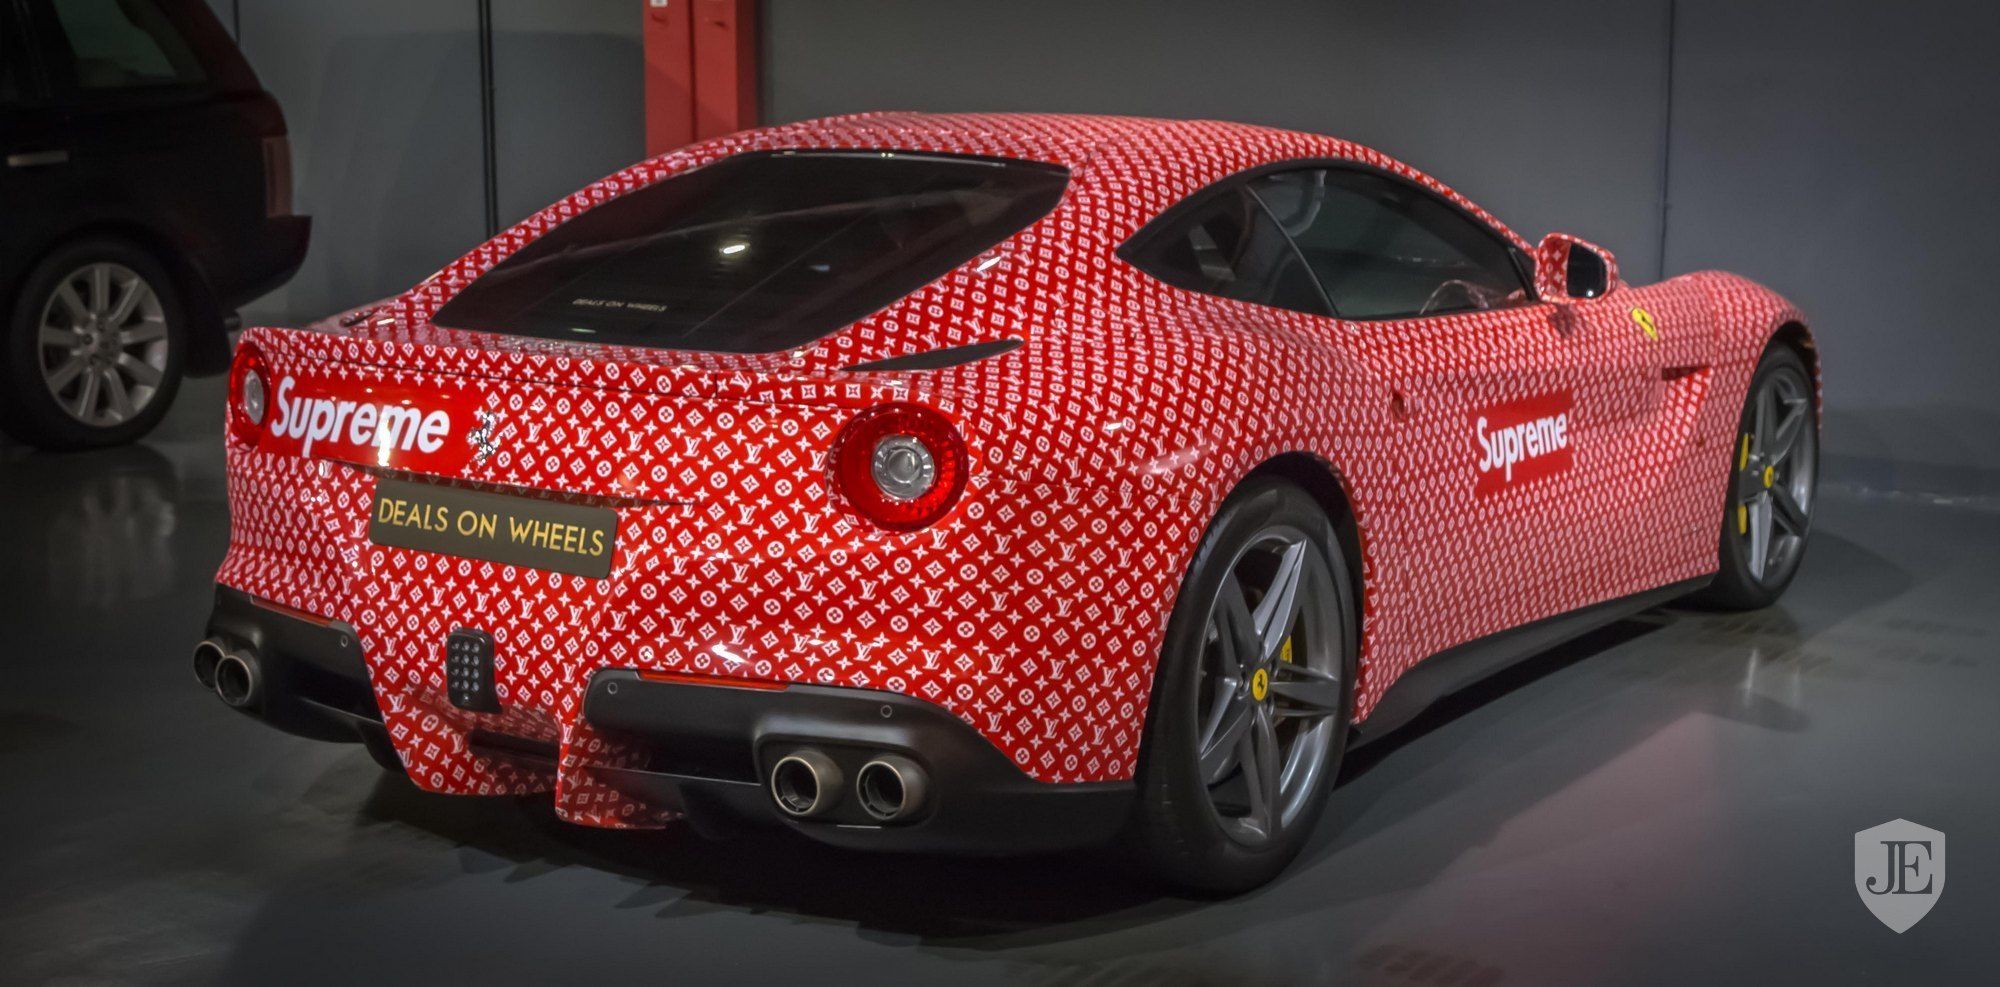 Aura on X: hey if u wanna see the ugliest car wrap in existence, here's a  Ferrari F12 for sale in Dubai right now the Supreme x Louis Vuitton wrap  was designed